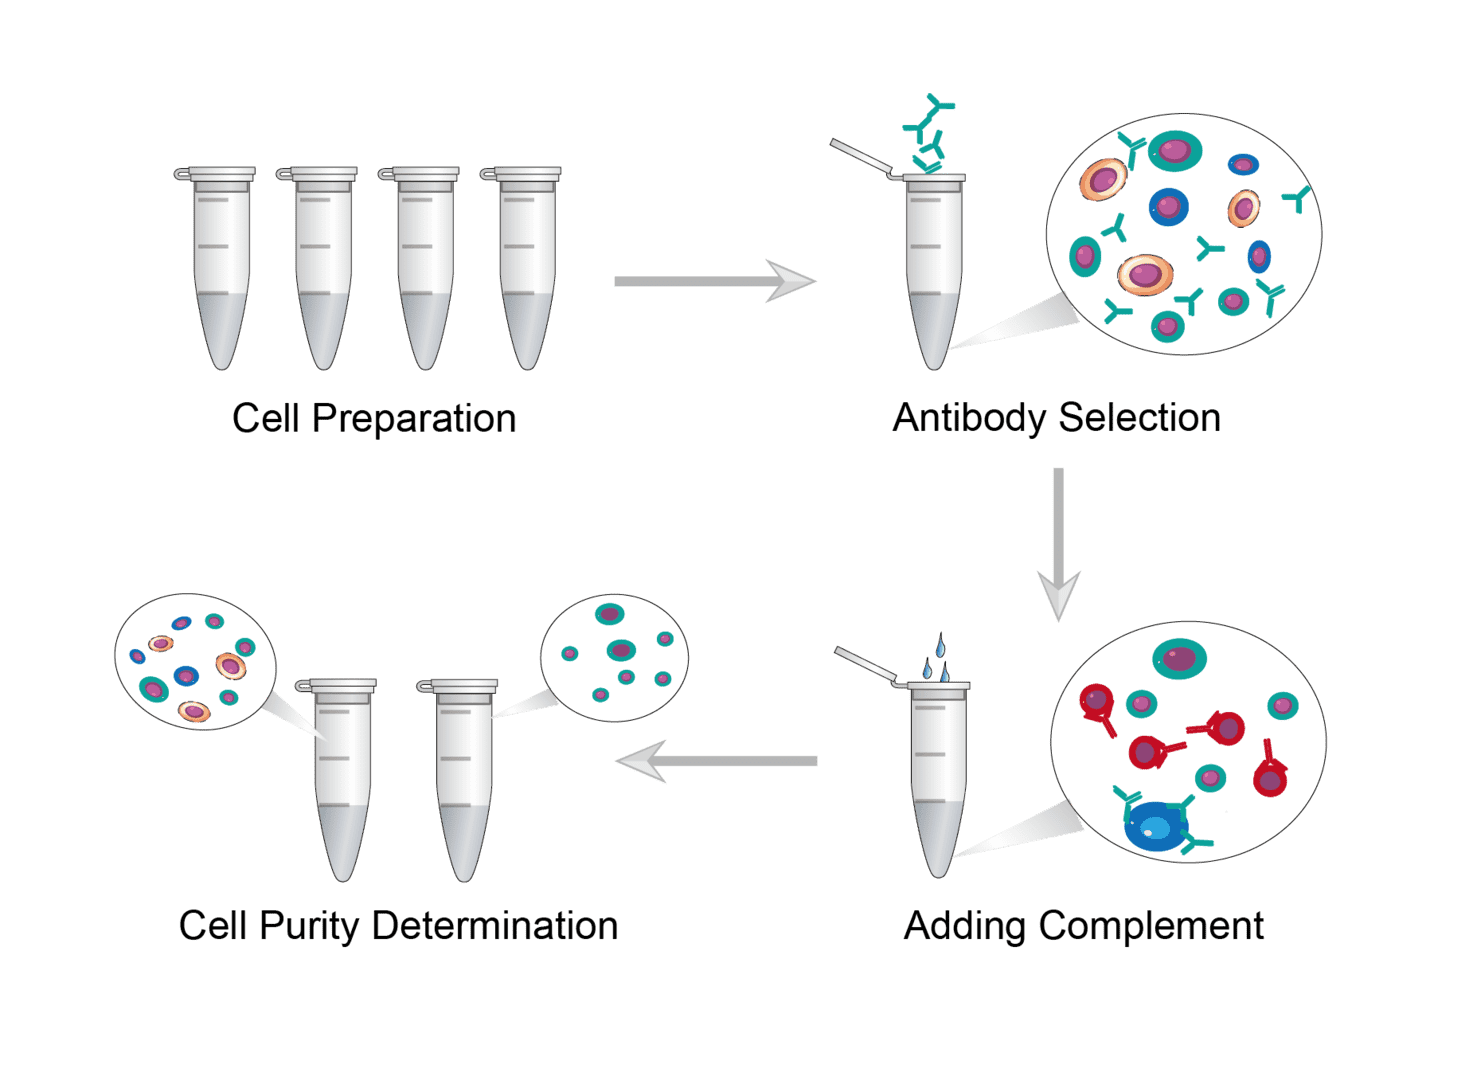 Complement Mediated Cell Depletion